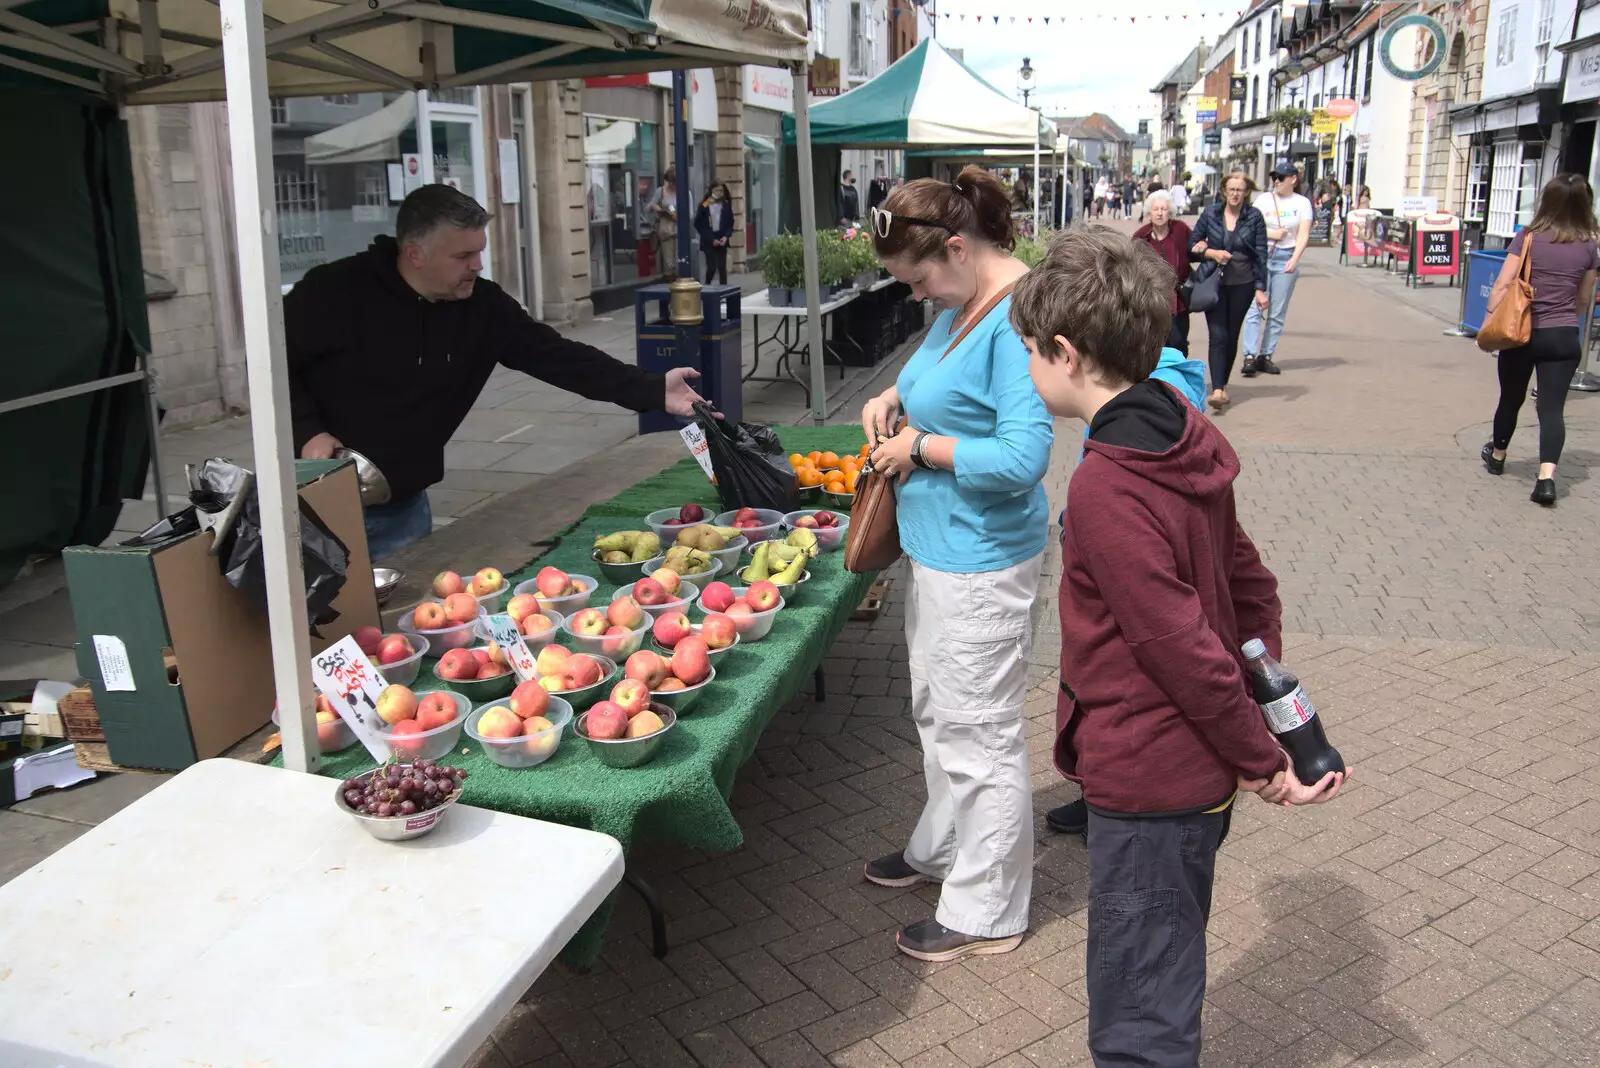 Isobel gets some fruit on the market, from Pork Pies and Dockside Dereliction, Melton Mowbray and Liverpool - 7th August 2021